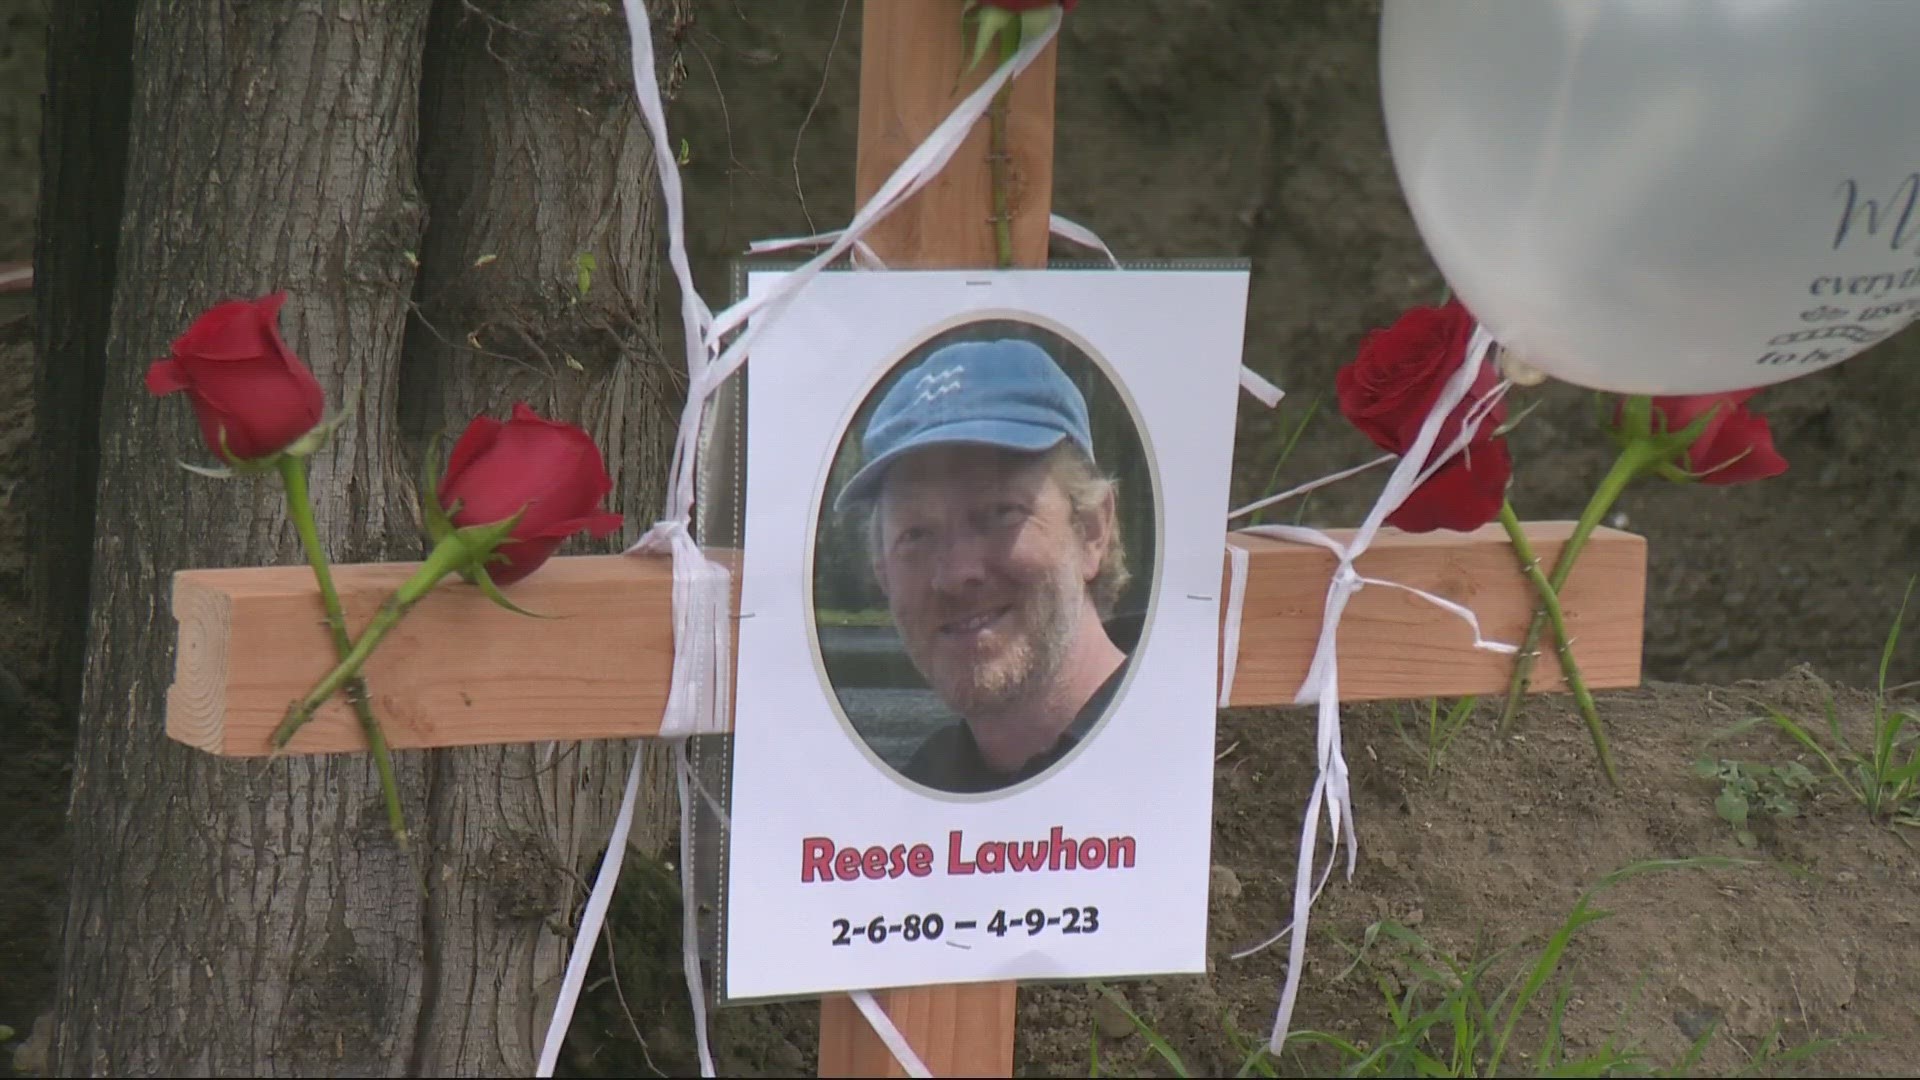 Reese Lawhon, 43, was celebrated as a talented artist and beloved member of the Portland community.